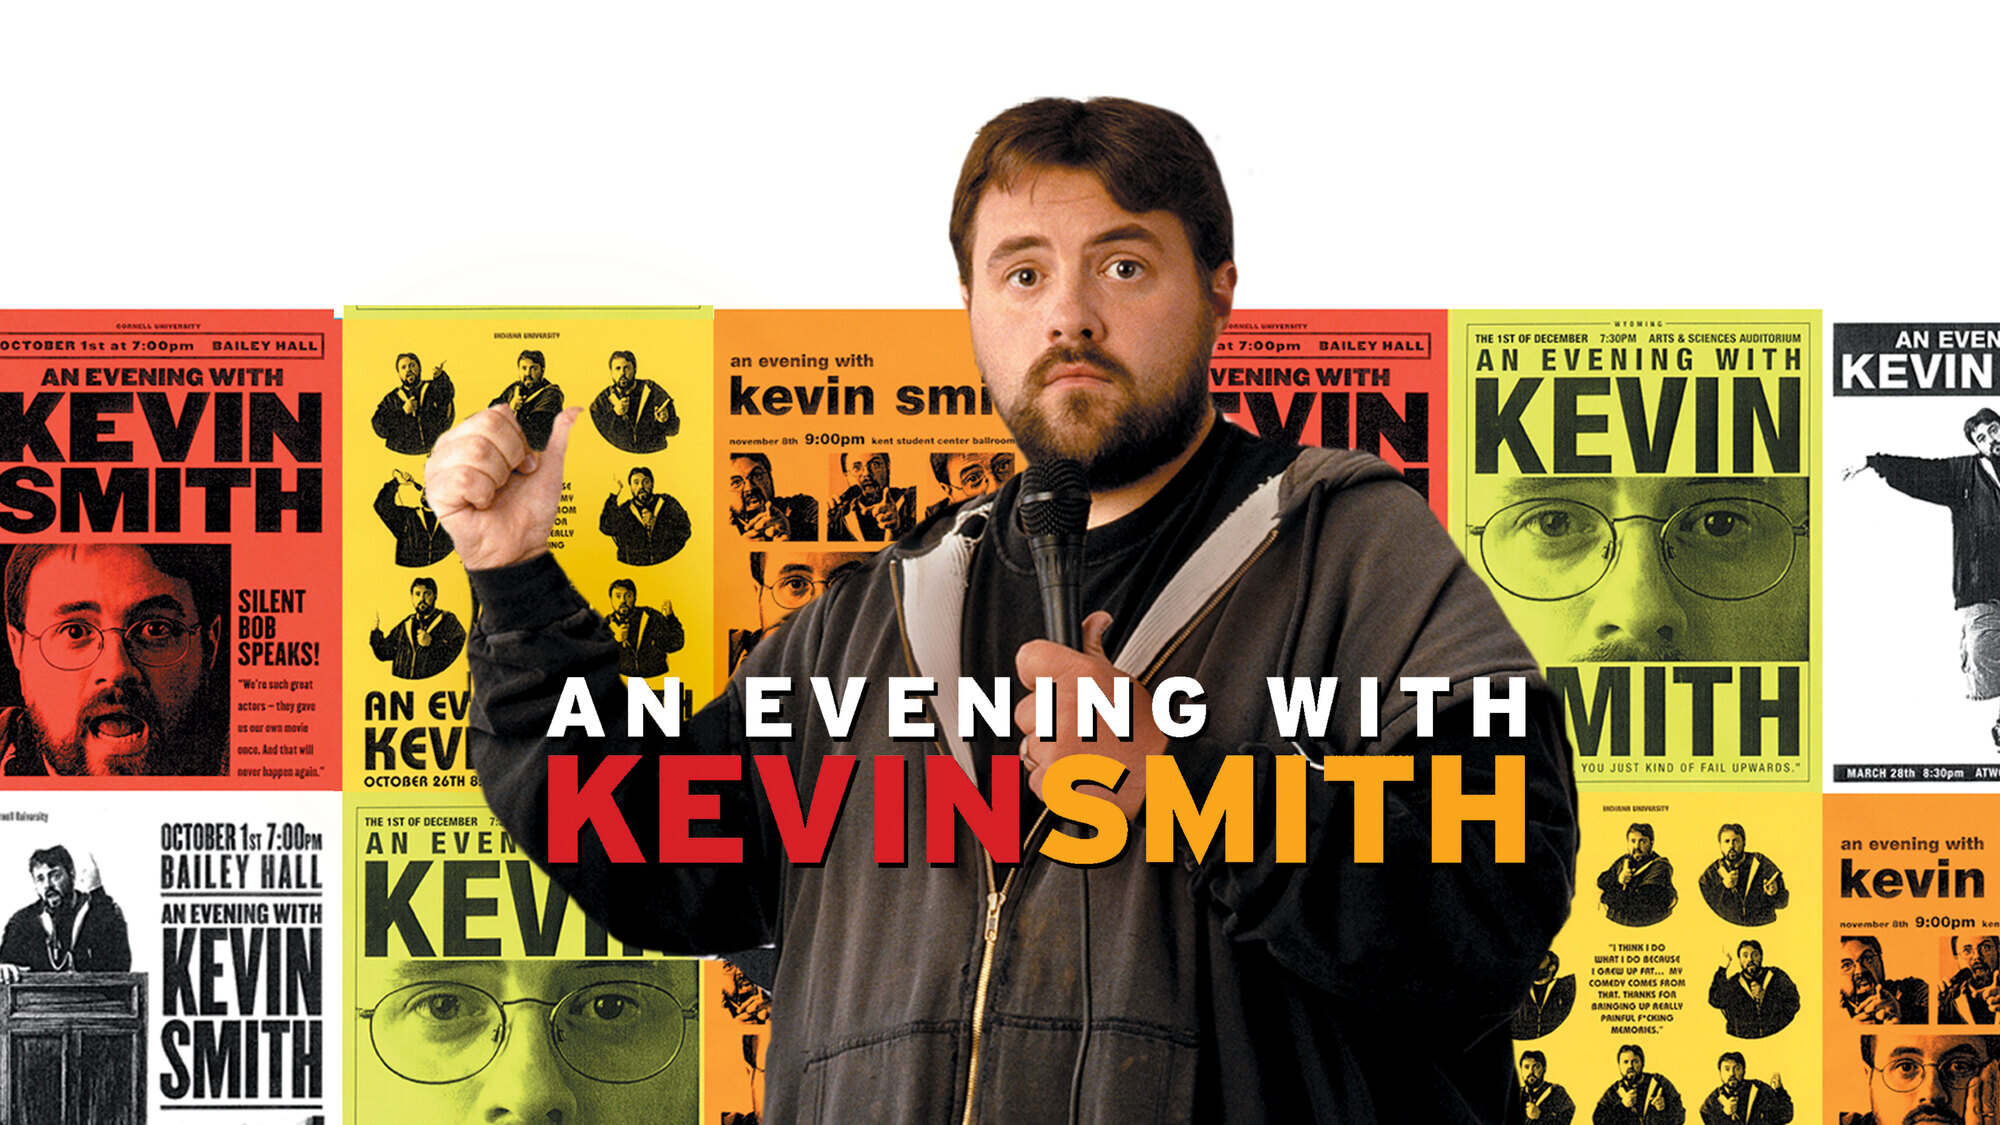 43-facts-about-the-movie-an-evening-with-kevin-smith